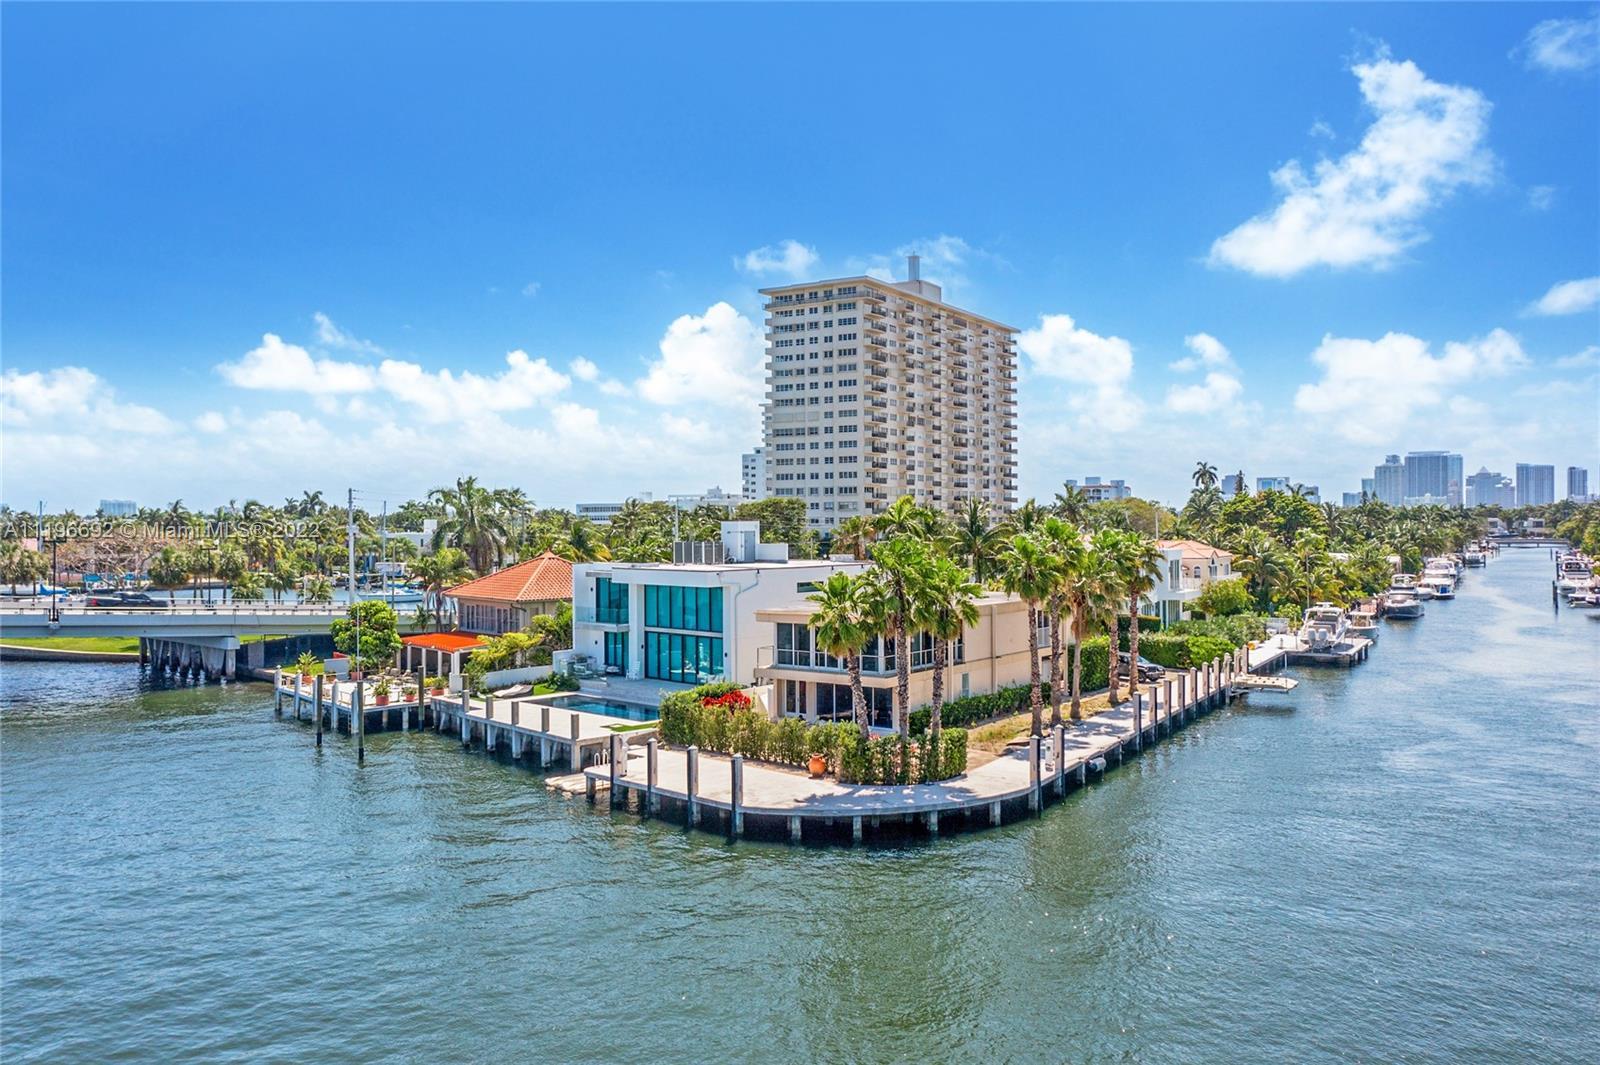 Rare and one of a kind point lot is within close proximity to Fort Lauderdale's famous Las Olas Boul